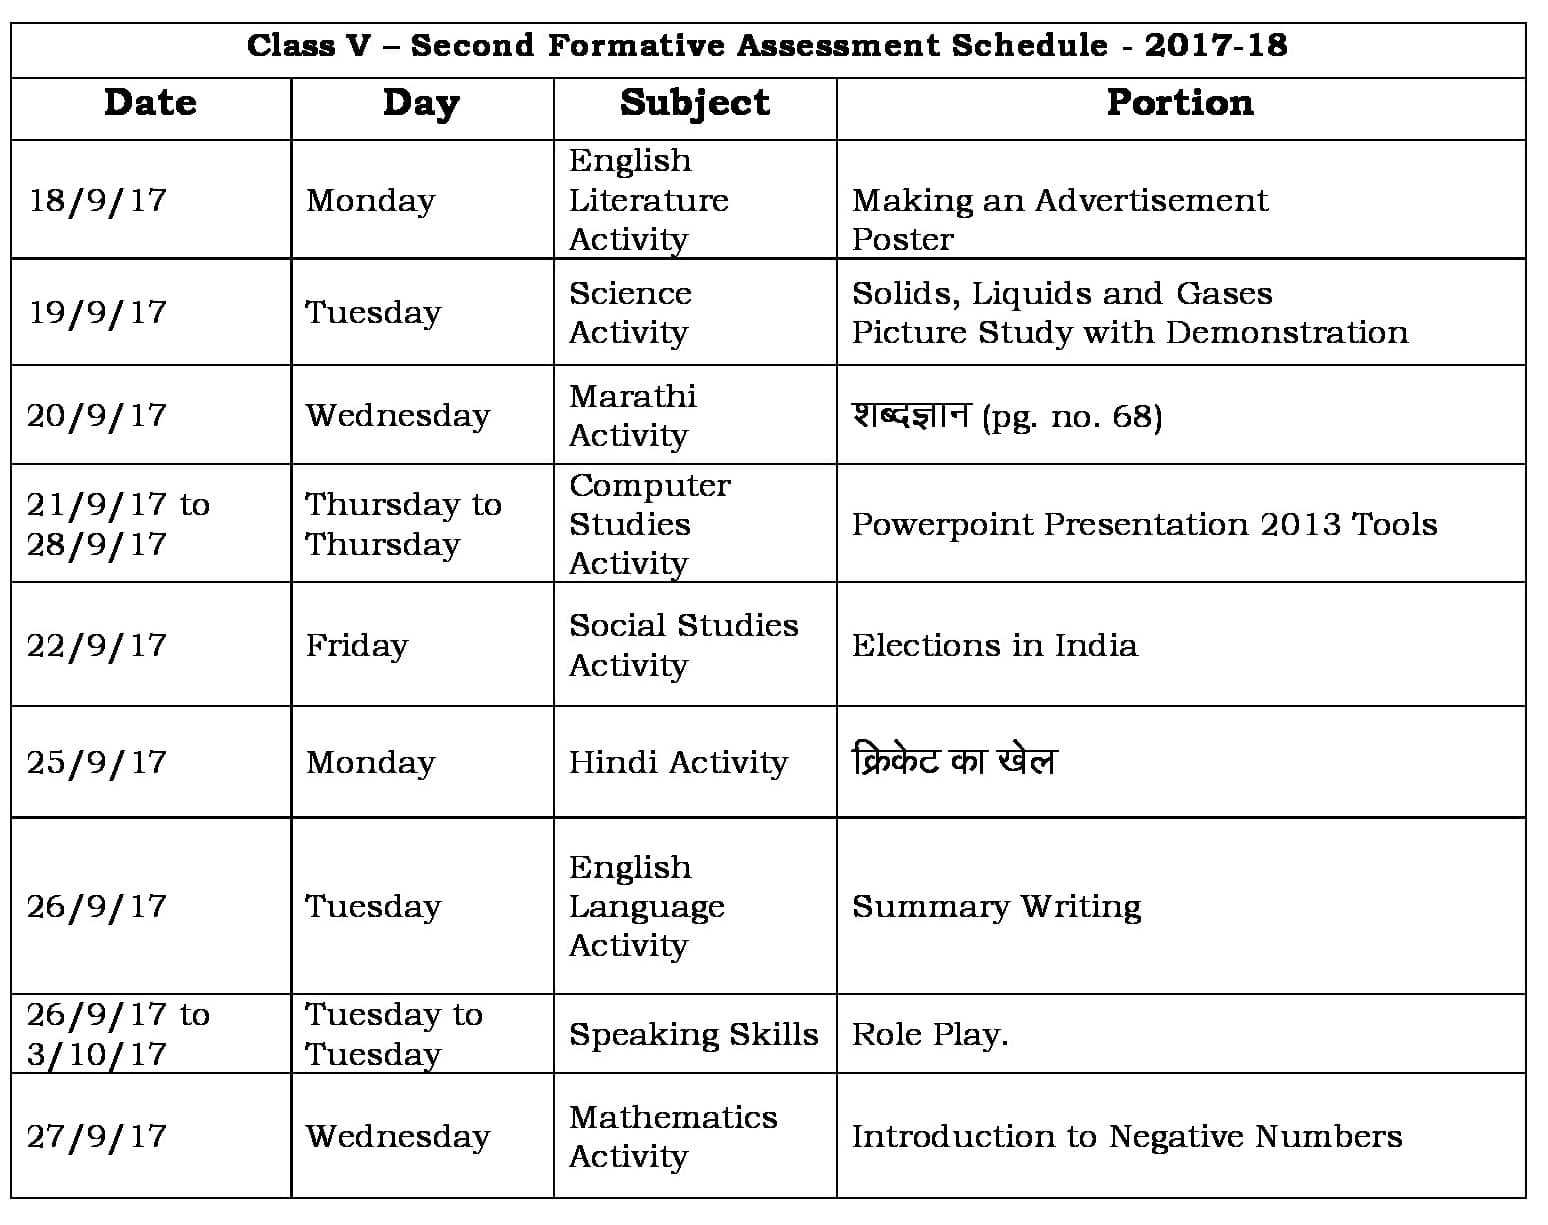 Schedule for FA-II Assesssments